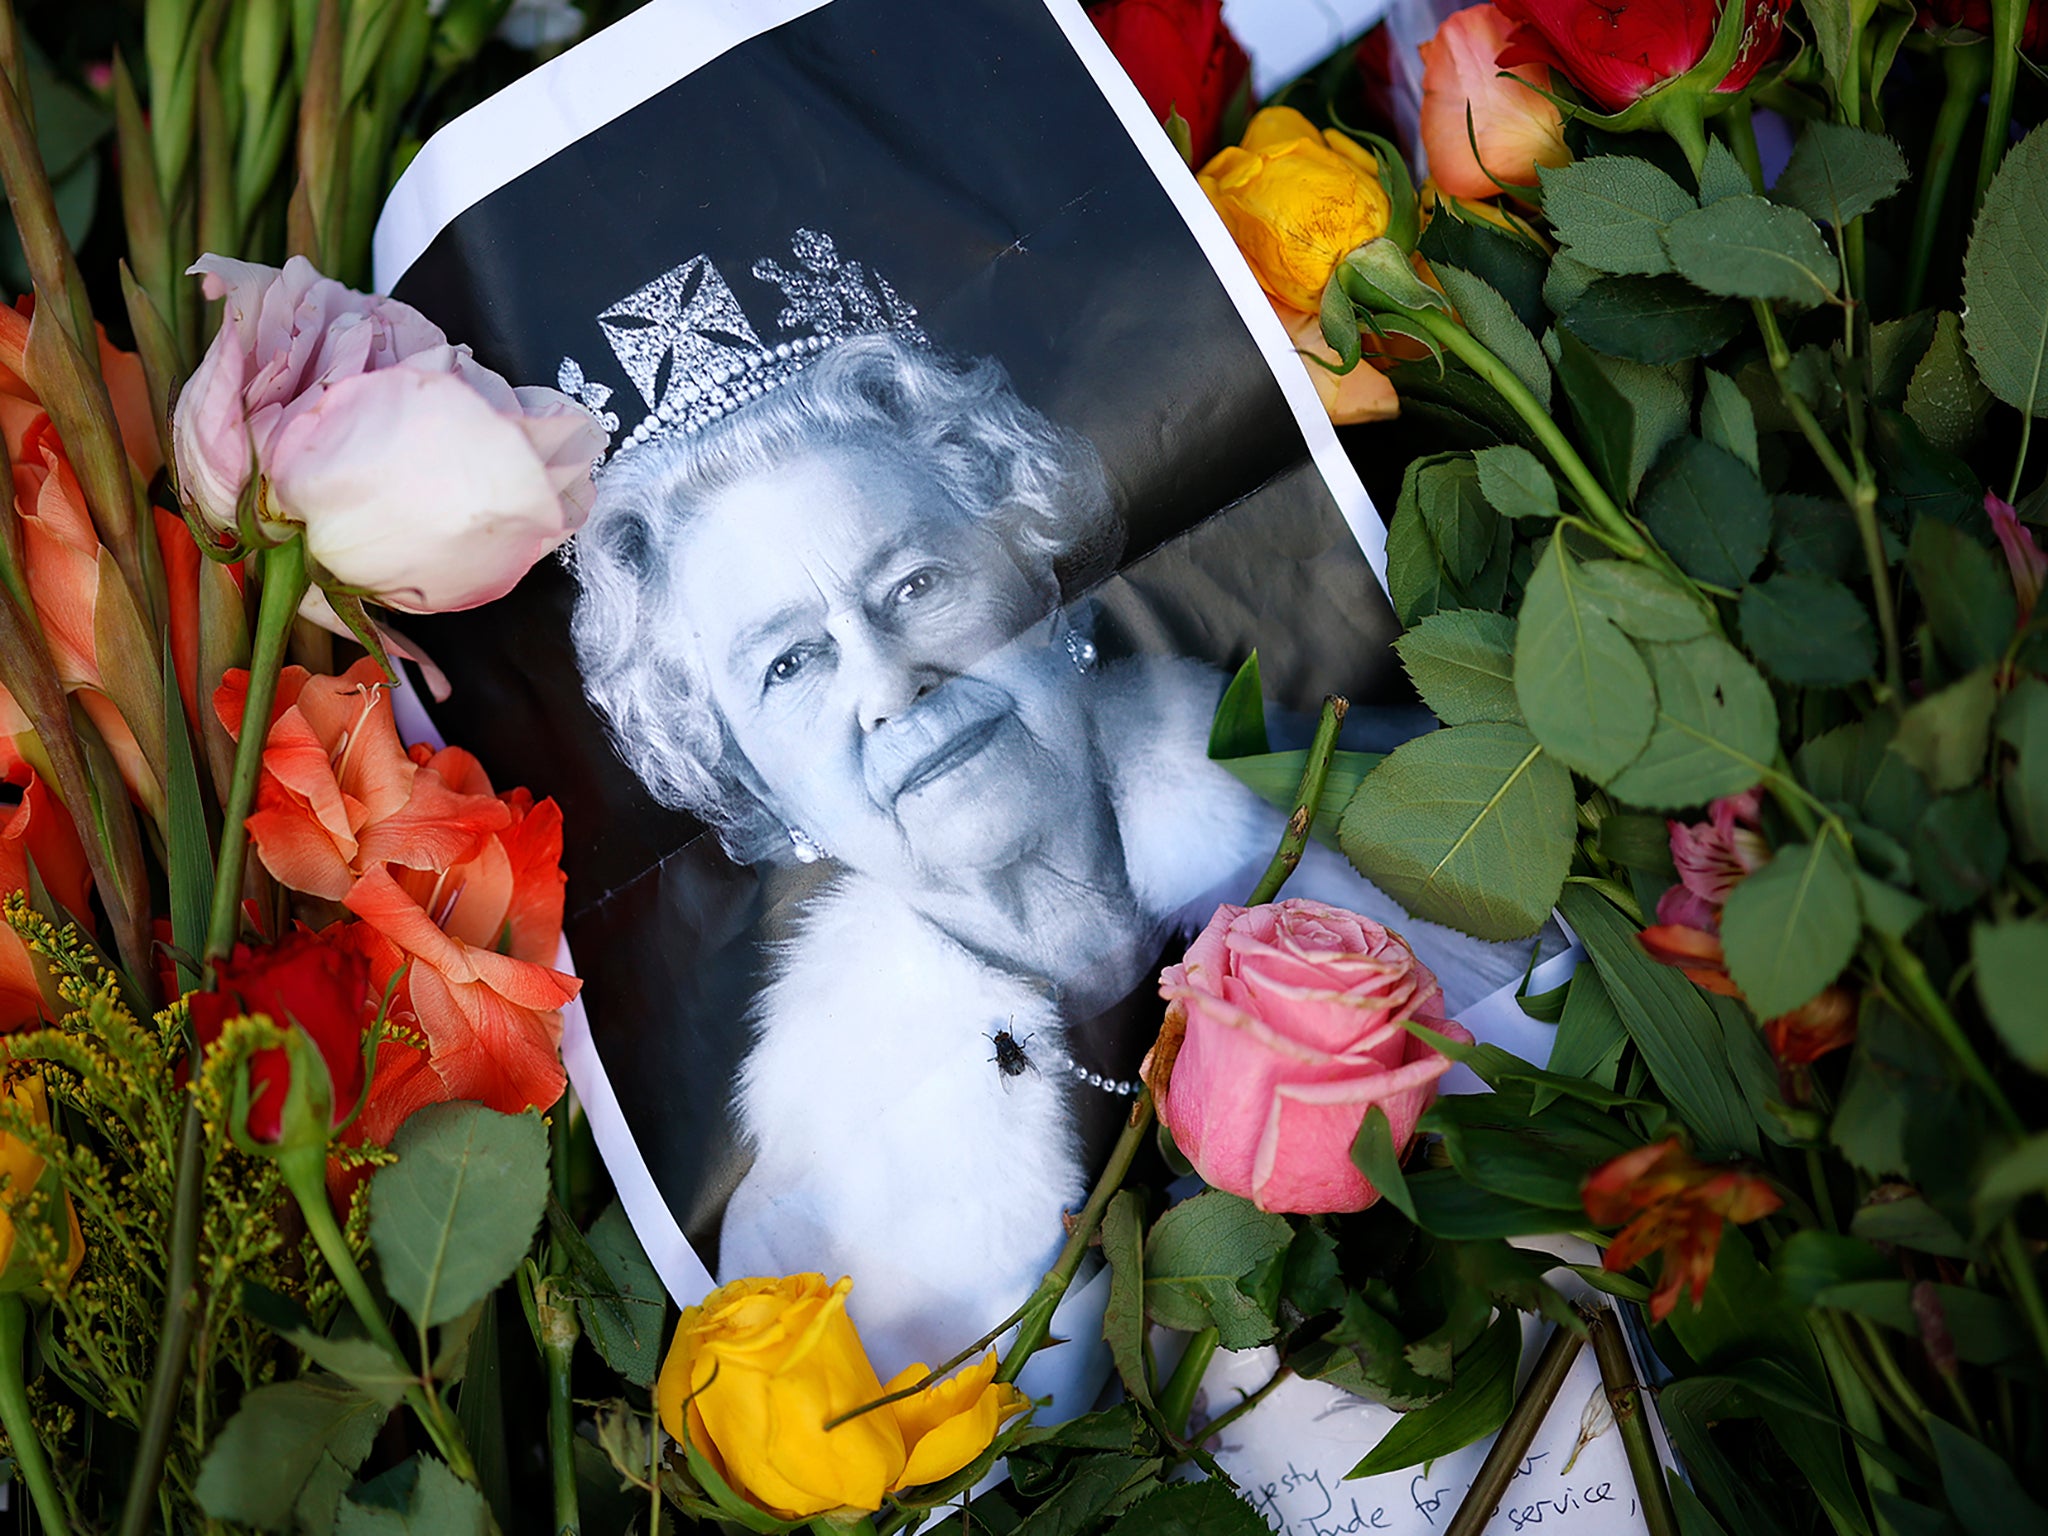 A photograph of Queen Elizabeth II lays among flowers left at a memorial site near Buckingham Palace this weekend